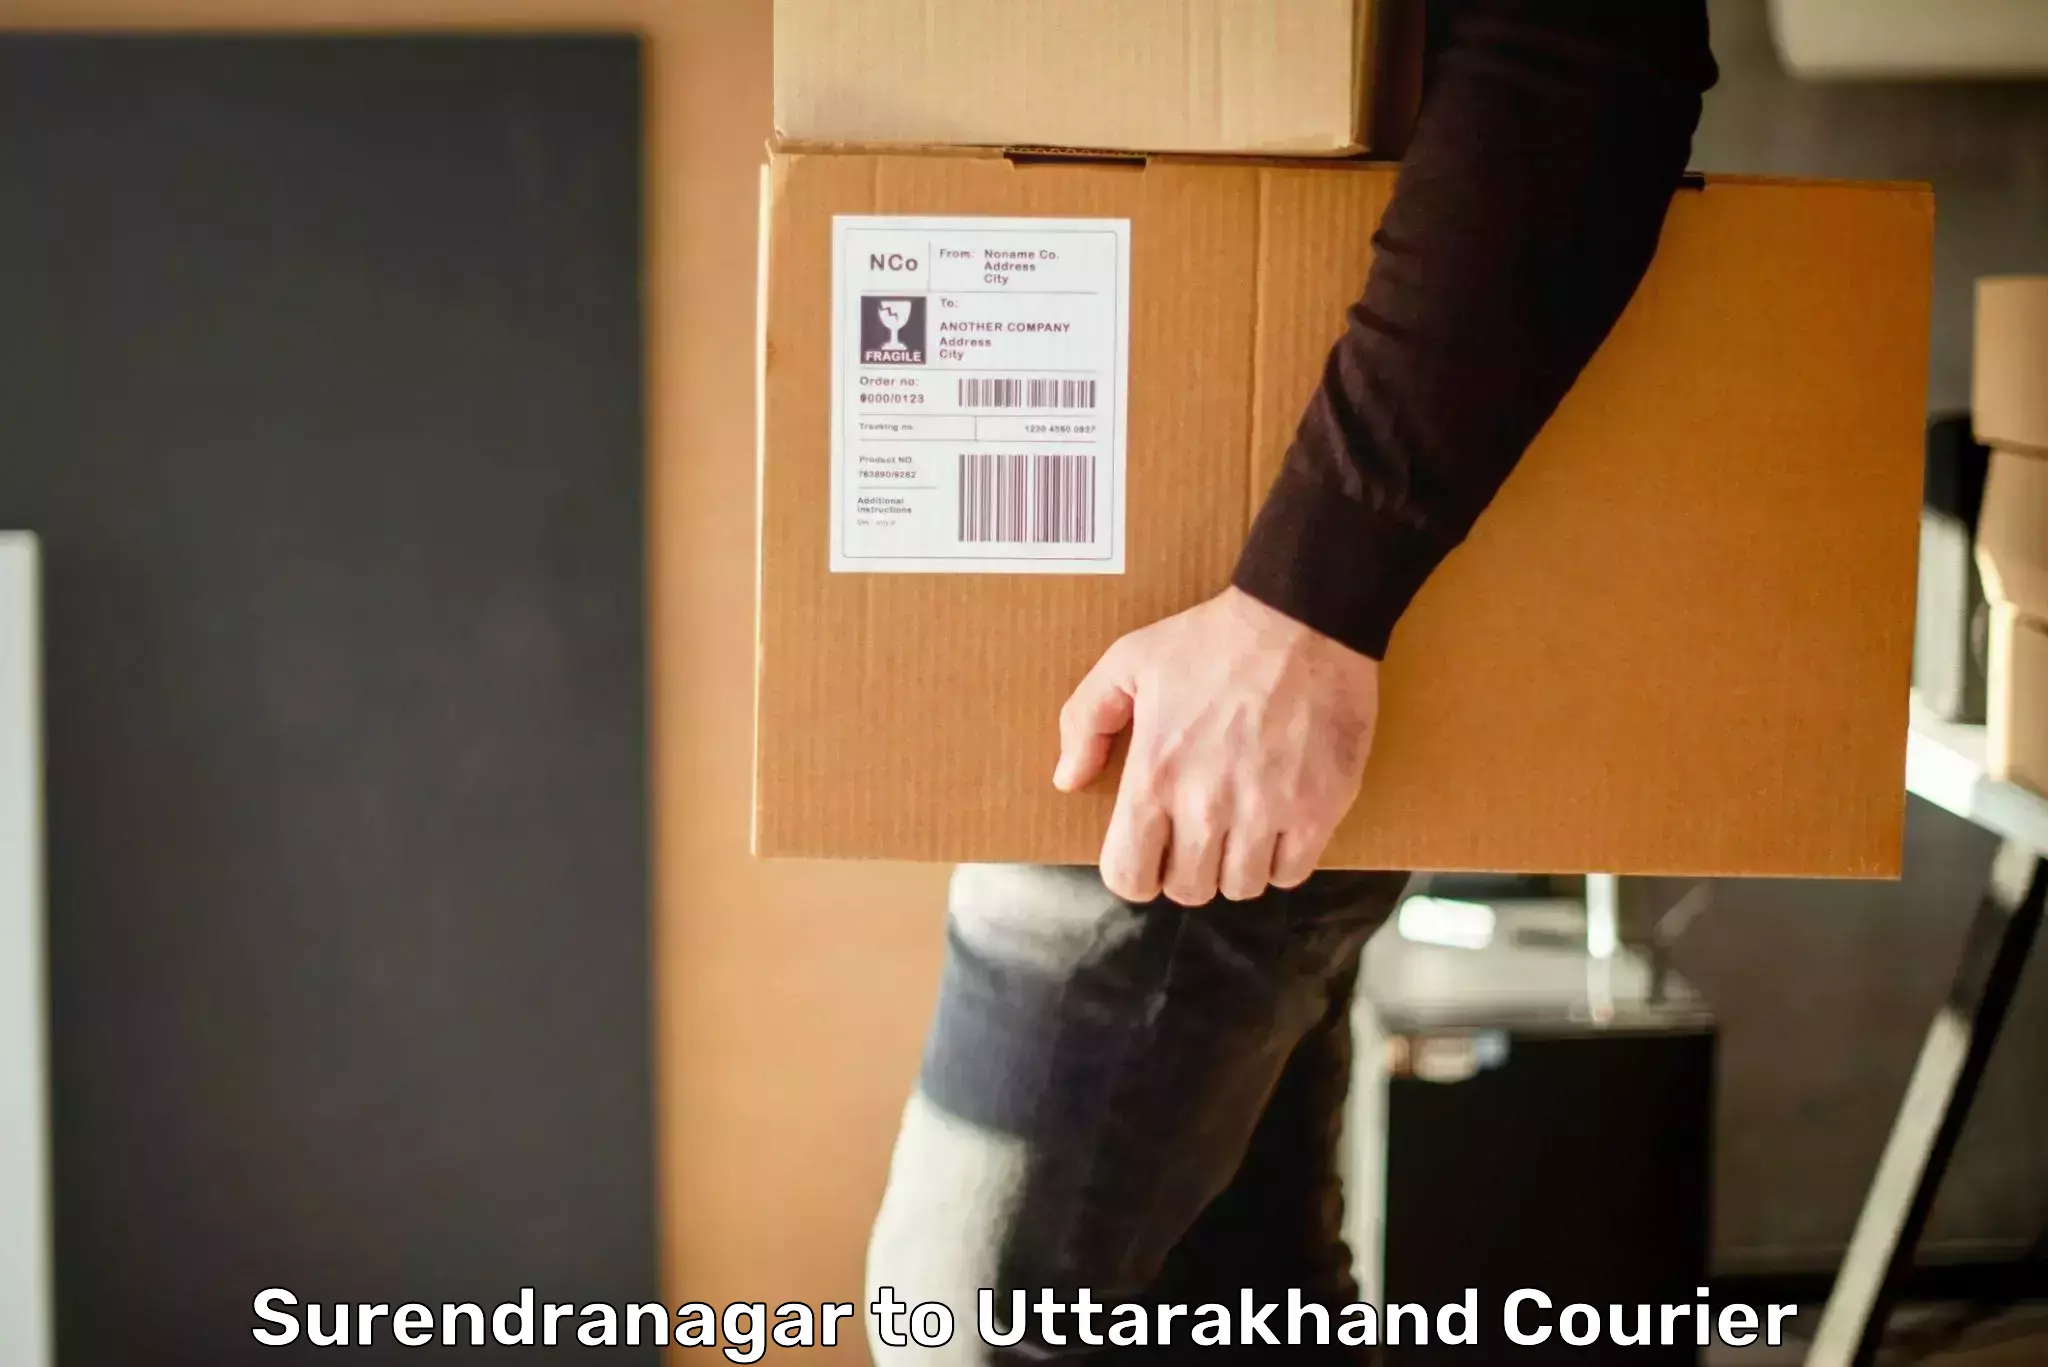 Large-scale shipping solutions Surendranagar to Uttarakhand